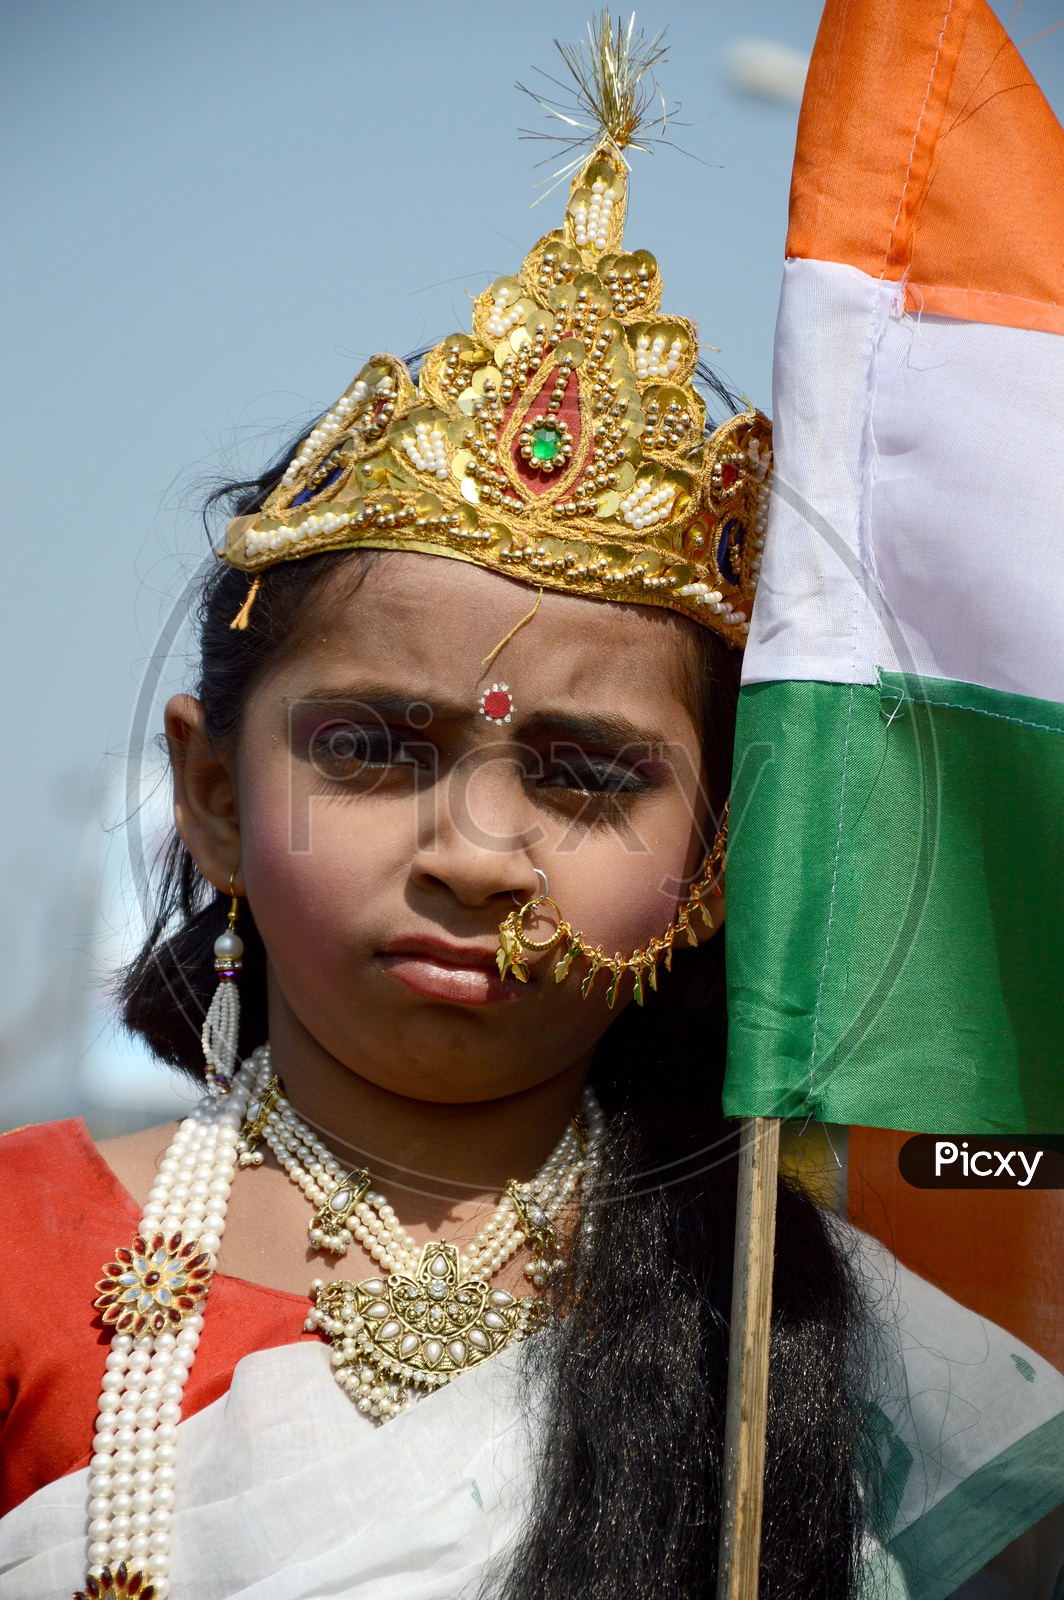 An Indian Girl Child In Bharath Mata  Makeup Or Attire at Independence Day Celebrations